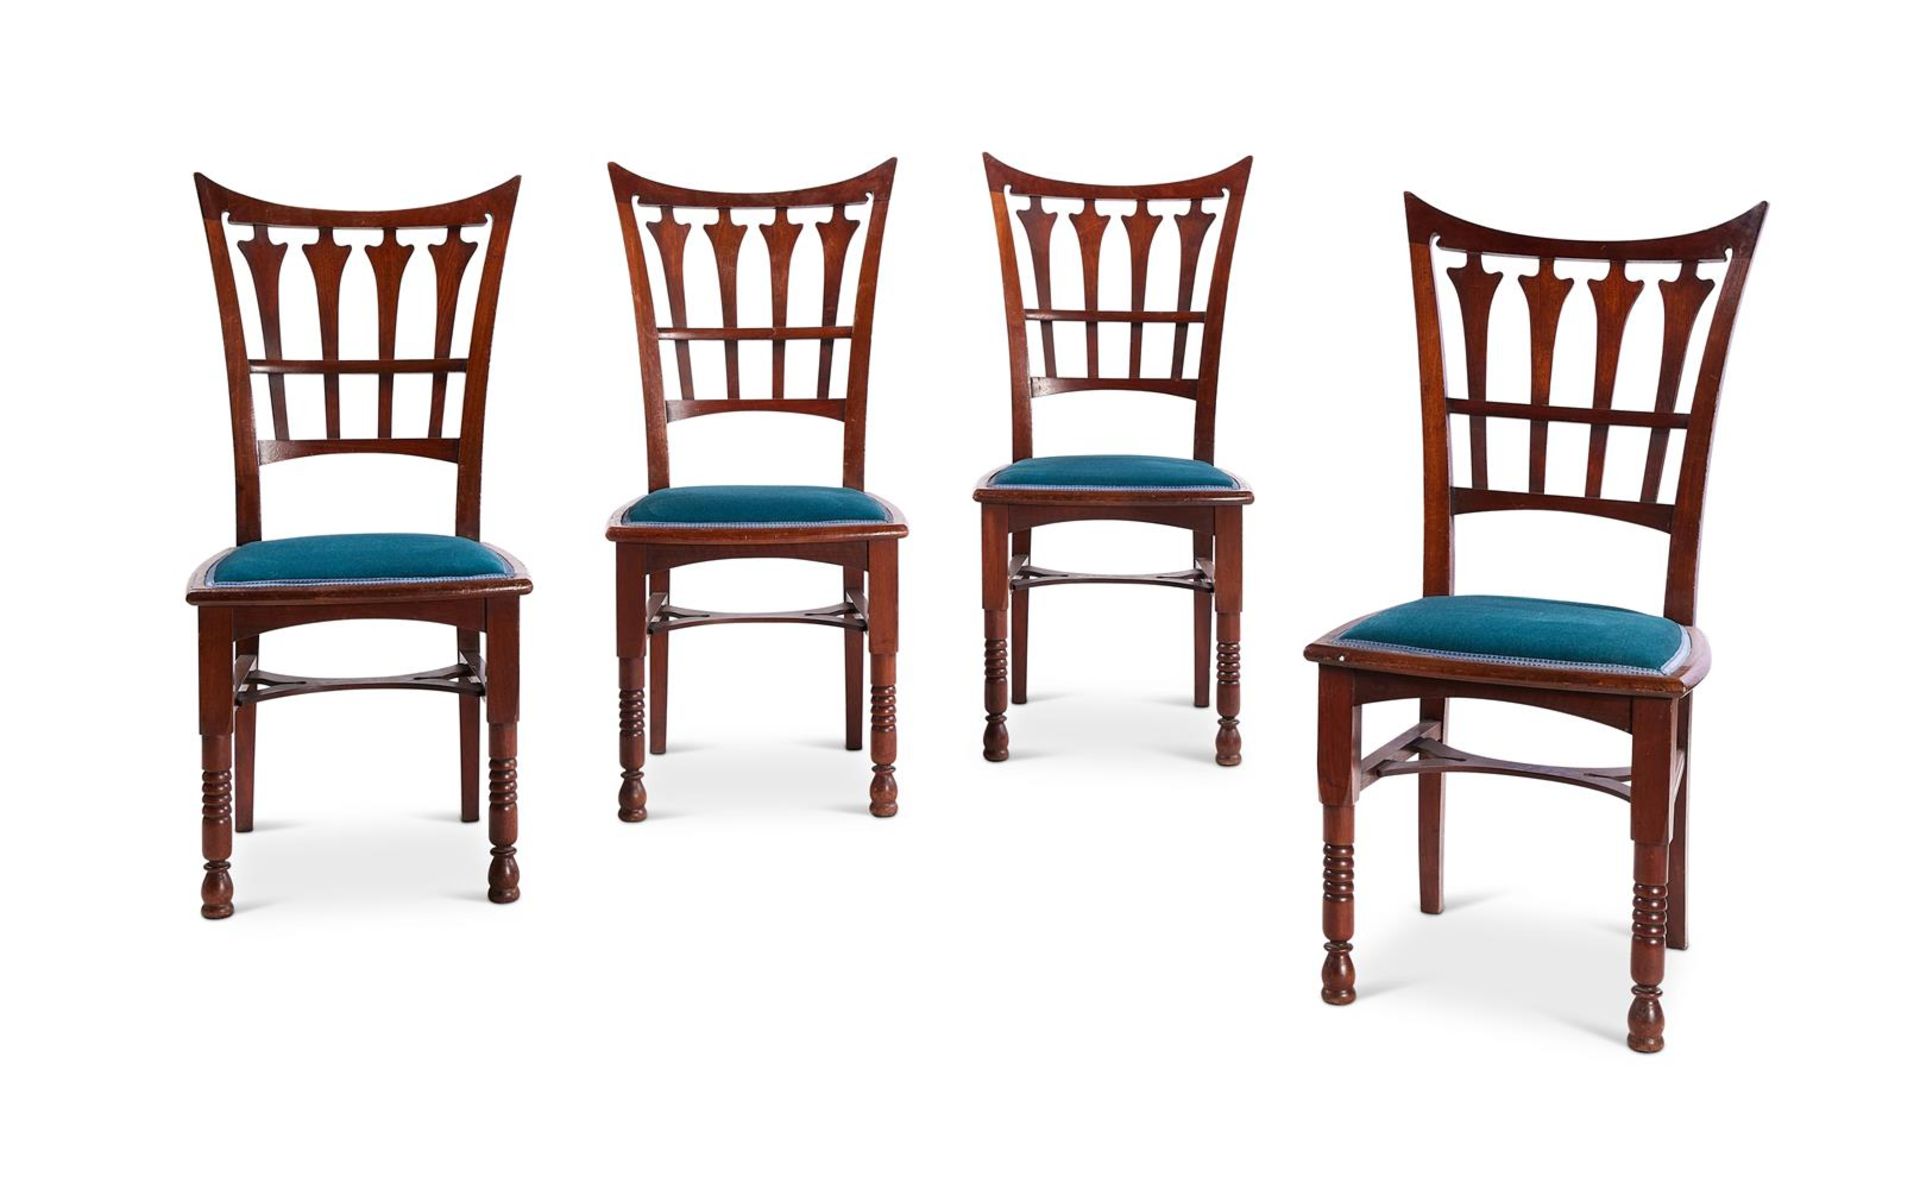 A SET OF FOUR MAHOGANY 'TULIP' CHAIRS ATTRIBUTED TO GUSTAVE SERRURIER-BOVY (1858-1910)